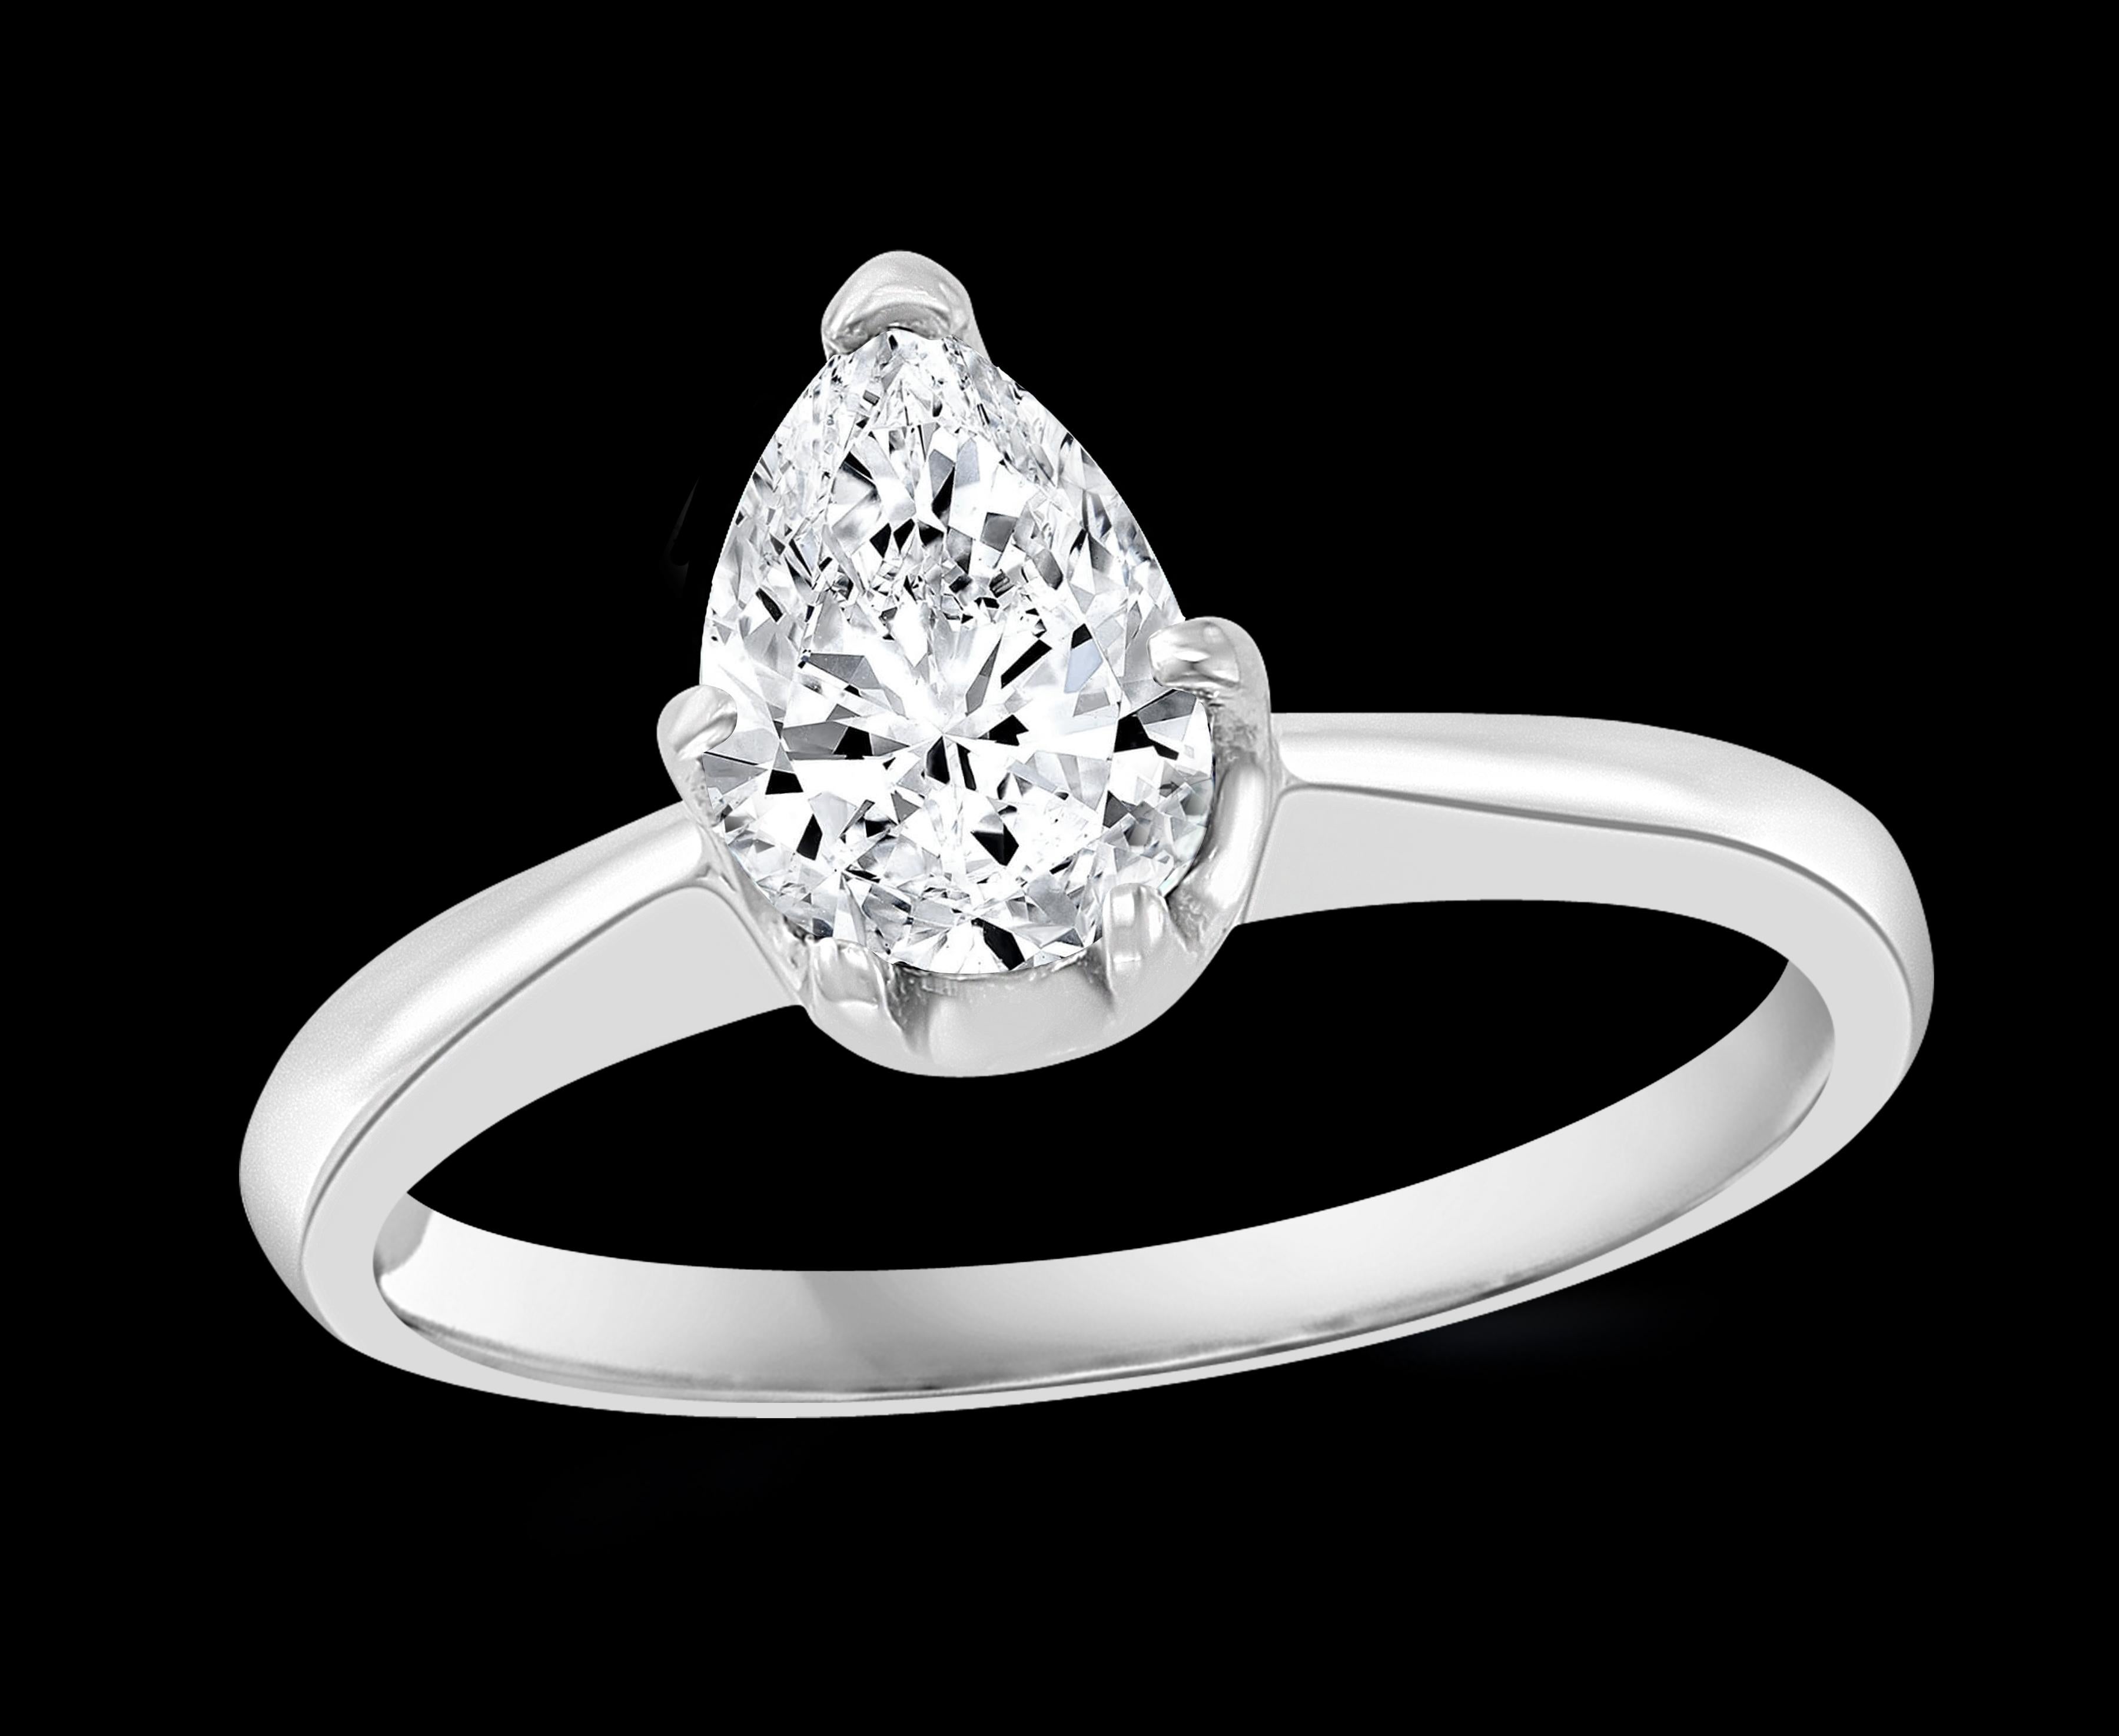 Approximately 1.20 Carat Center Diamond Engagement 14 Karat White Gold Ring 
14 K gold Stamped 2.5 Grams
The size of the stone is roughly 8.2 X 6.5 which is almost equal to 1.20 ct approximately.
Eye Clean diamond with lots of sparkle and